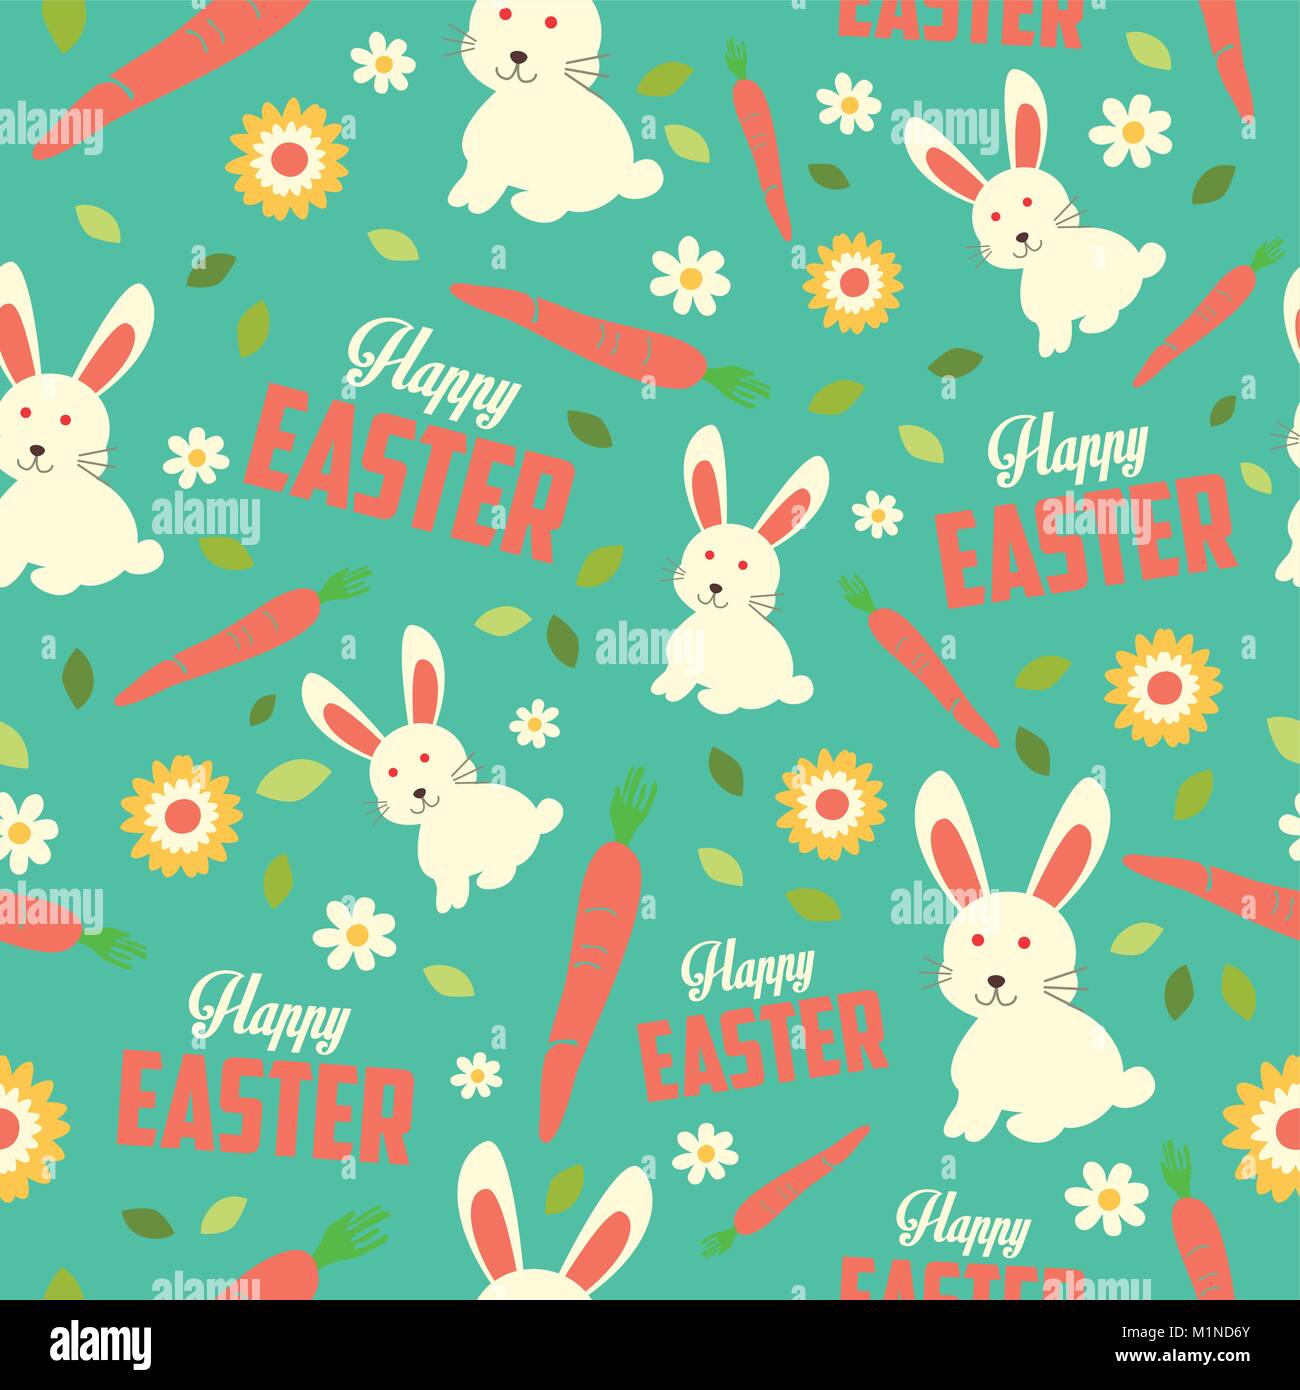 A vector illustration of Easter Bunny and Spring Wallpaper Seamless Pattern Background Stock Vector